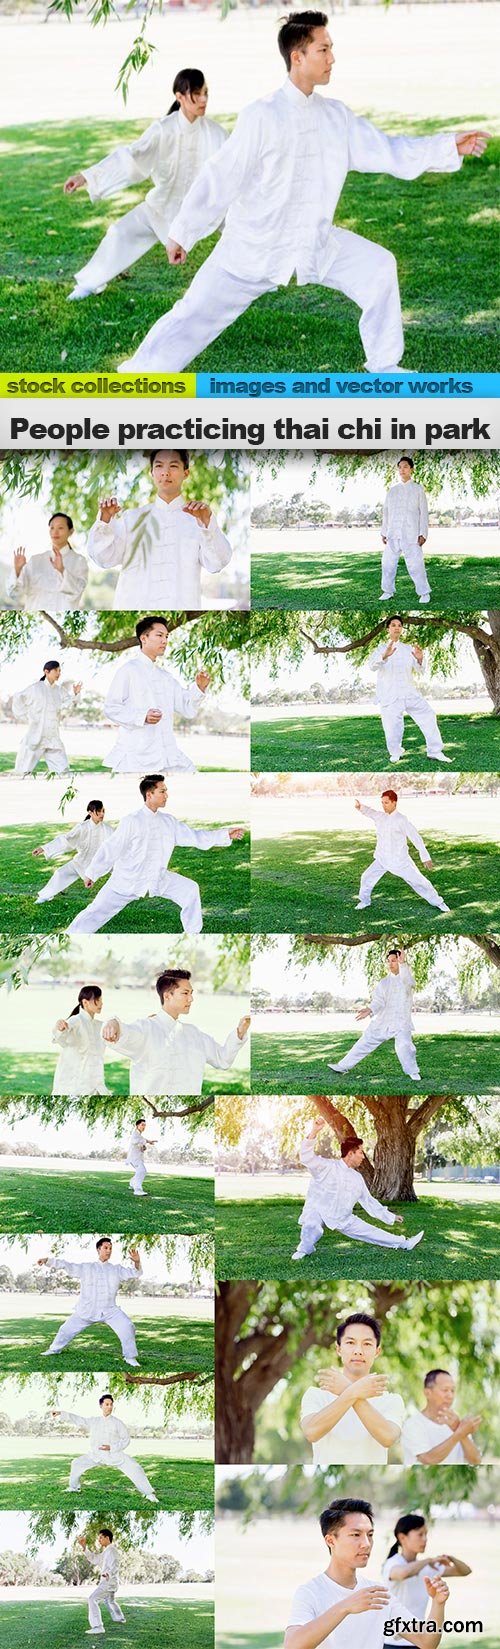 People practicing thai chi in park, 15 x UHQ JPEG